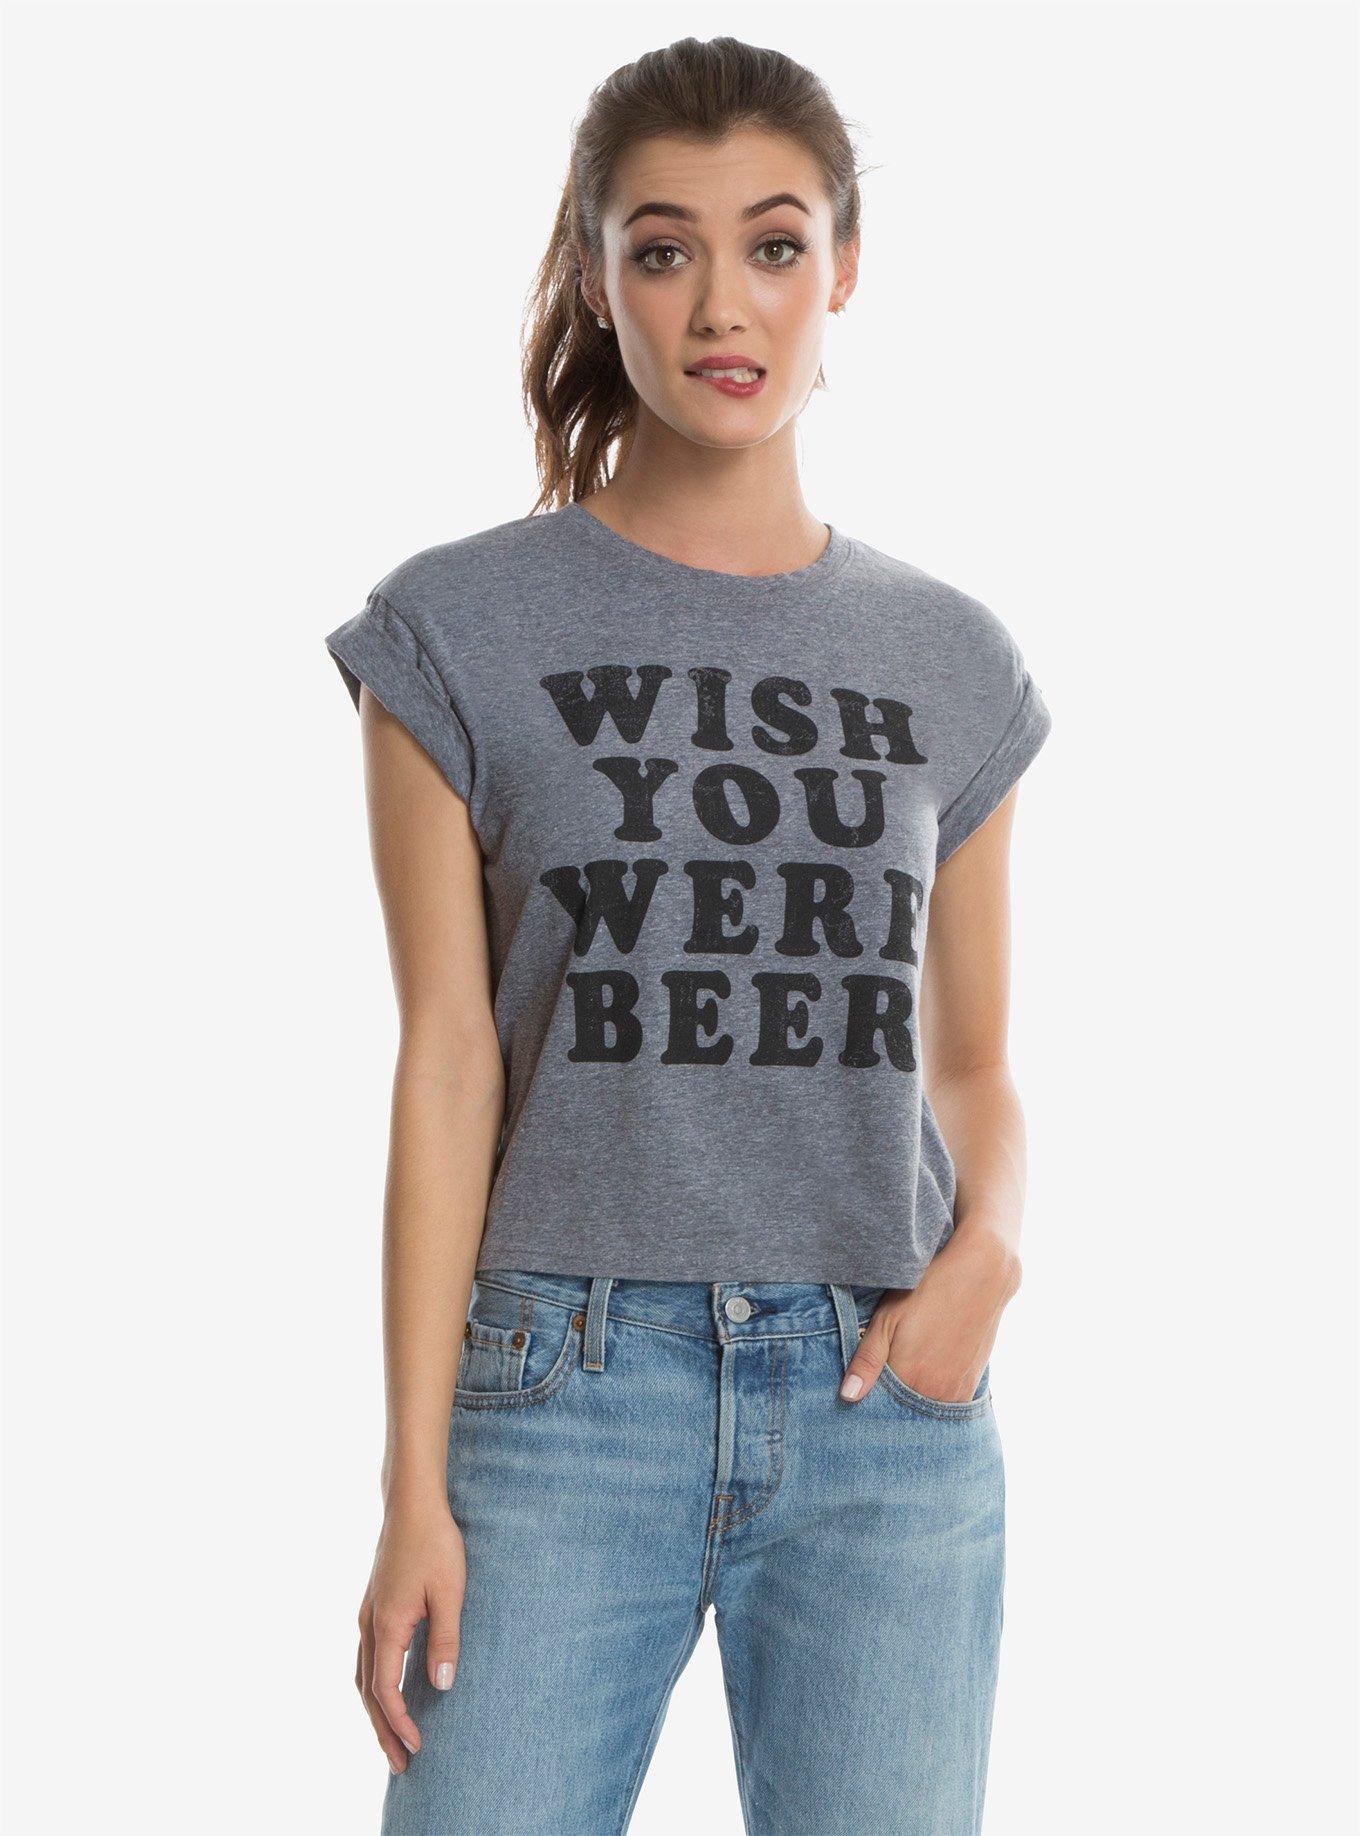 Wish You Were Beer Womens Cropped Tee, HEATHER GREY, hi-res